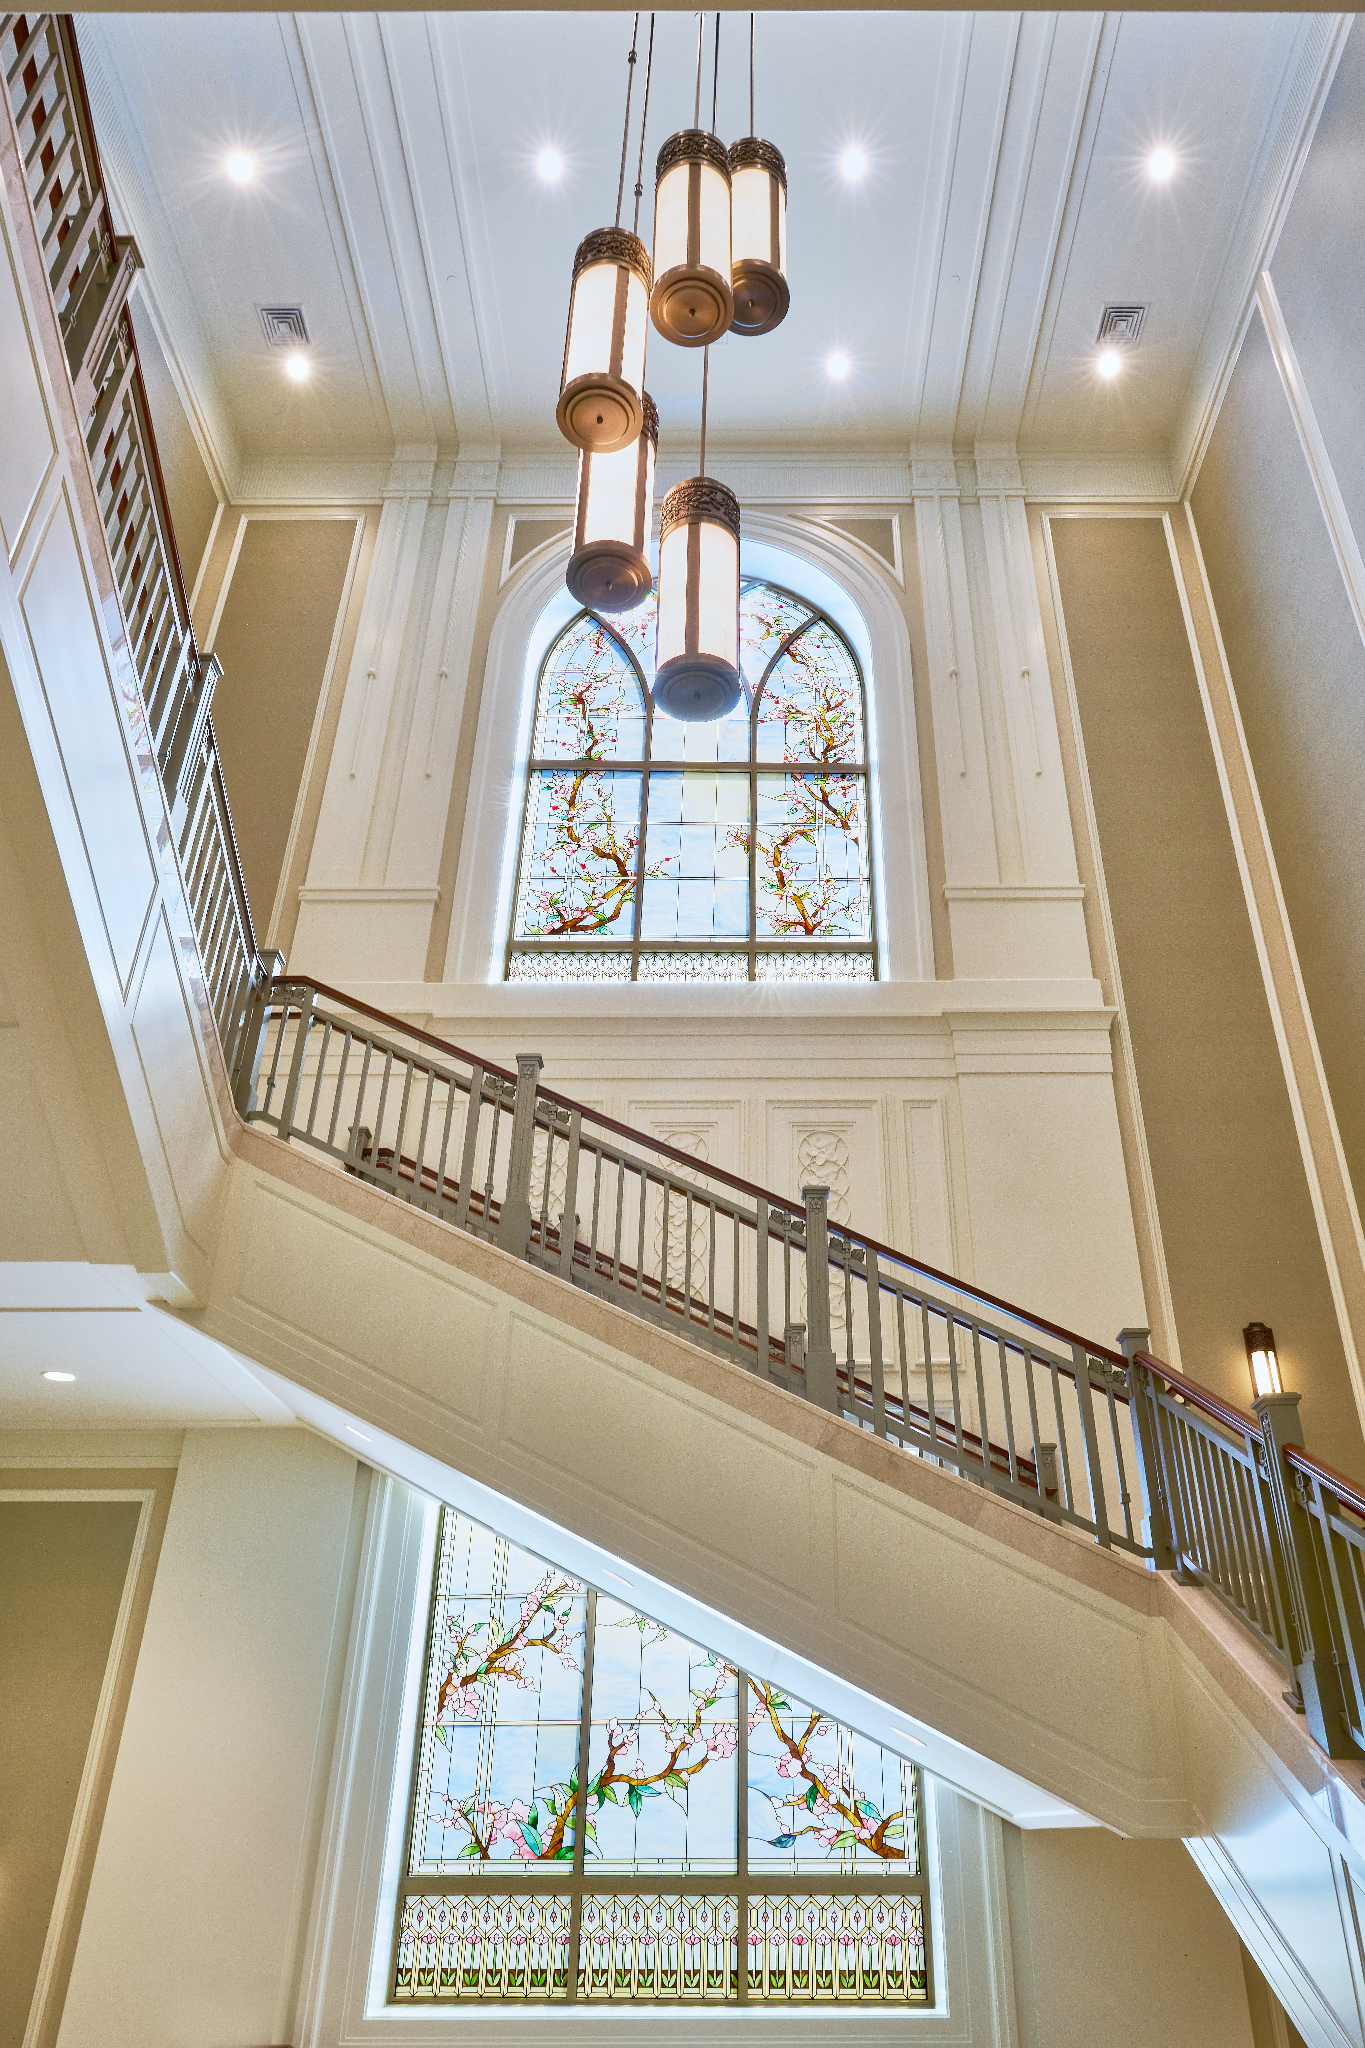 A low angle showing a tall staircase, with an arched, stained-glass window on the wall.